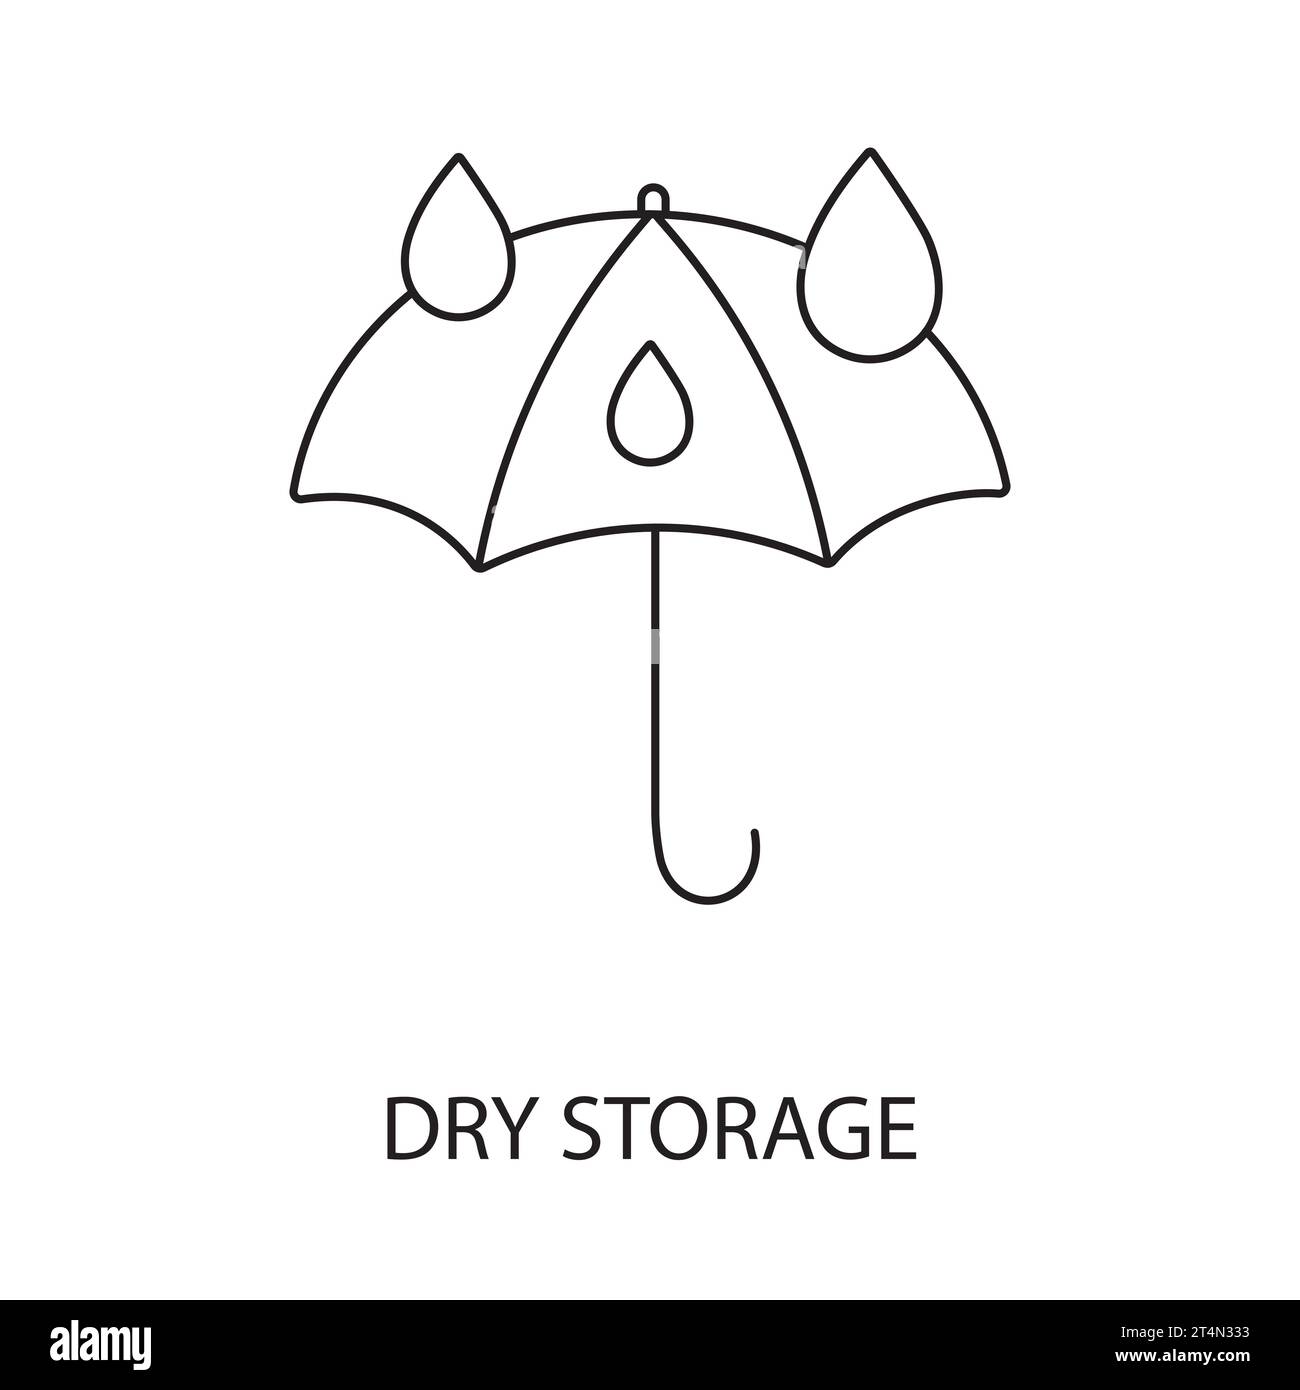 Storing in a dry place line vector for food packaging, illustration of an umbrella on which drops of water fall, protect from moisture. Stock Vector